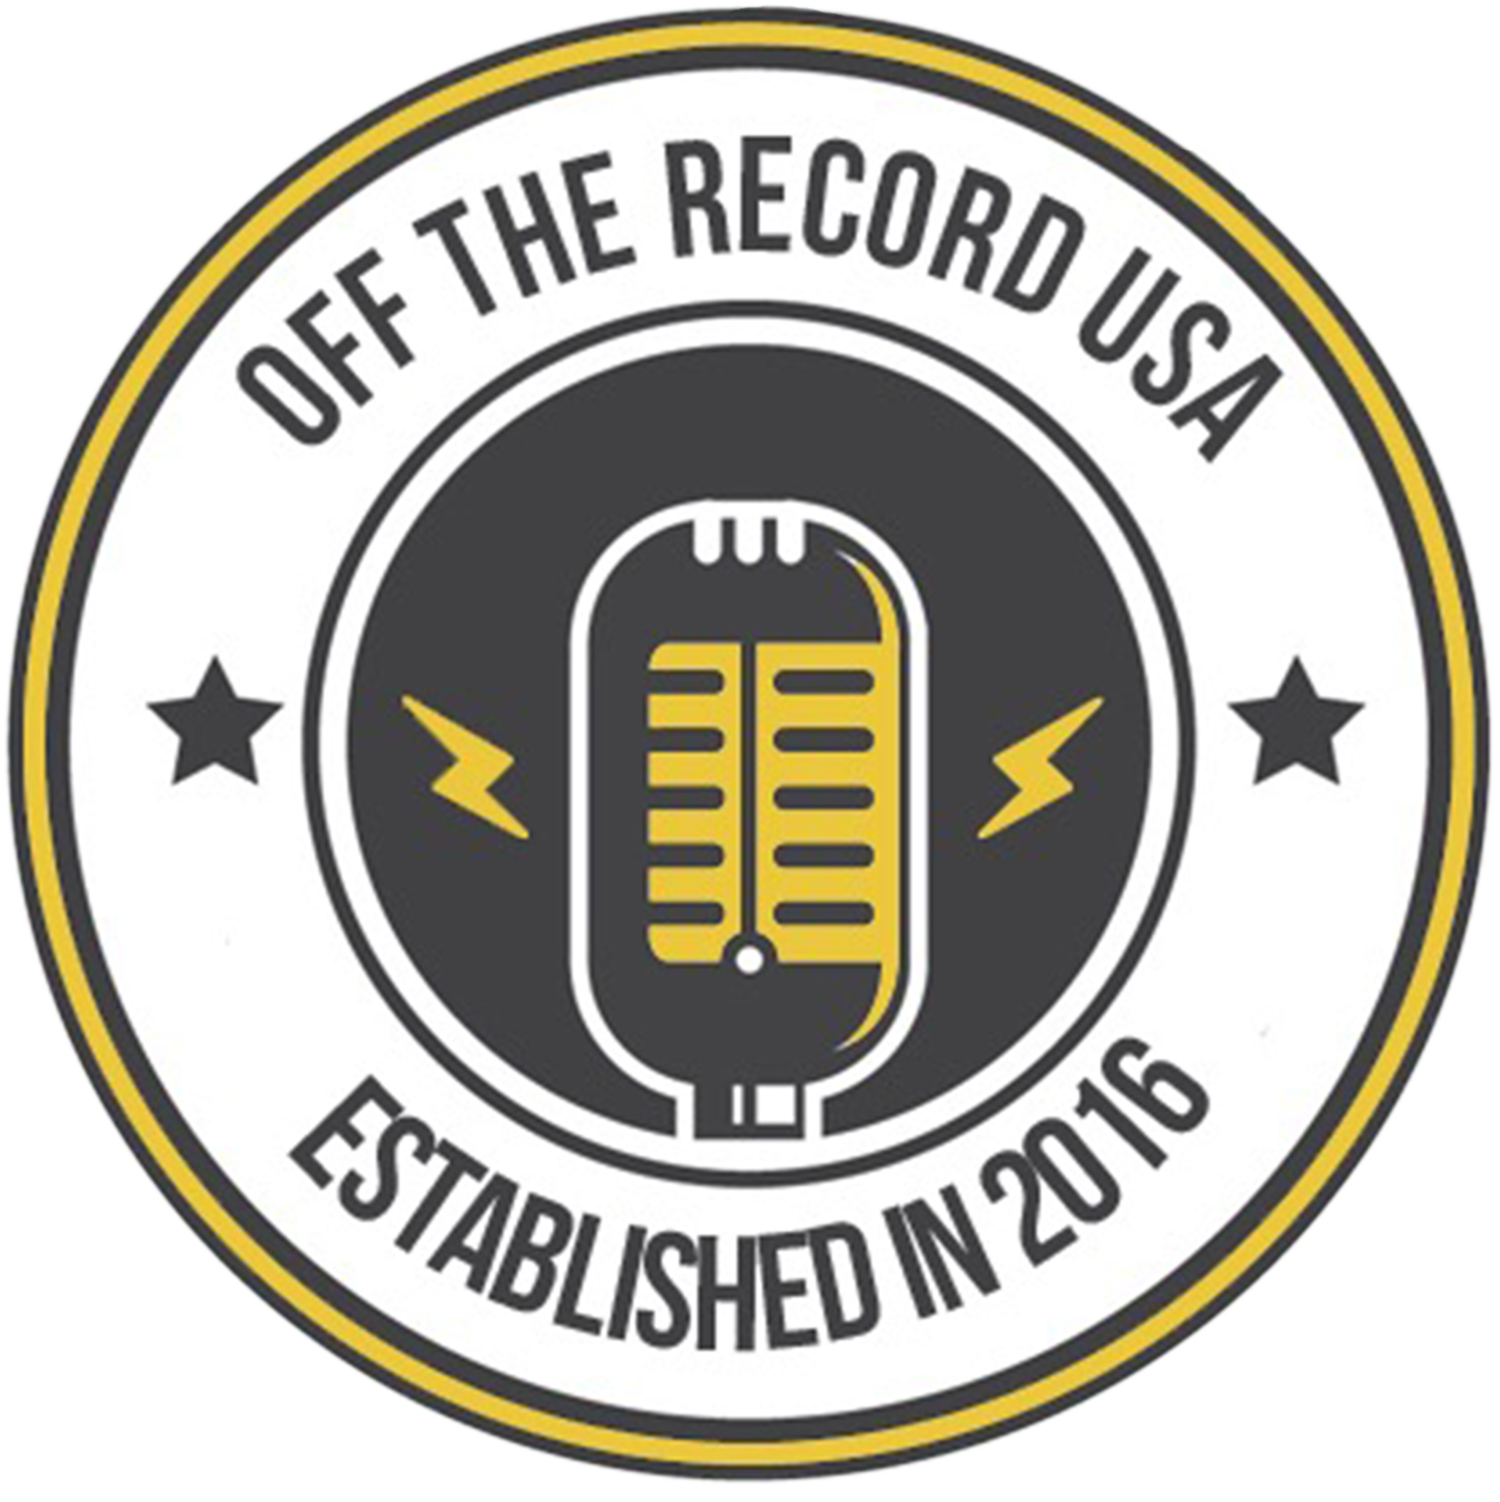 Off The Record USA